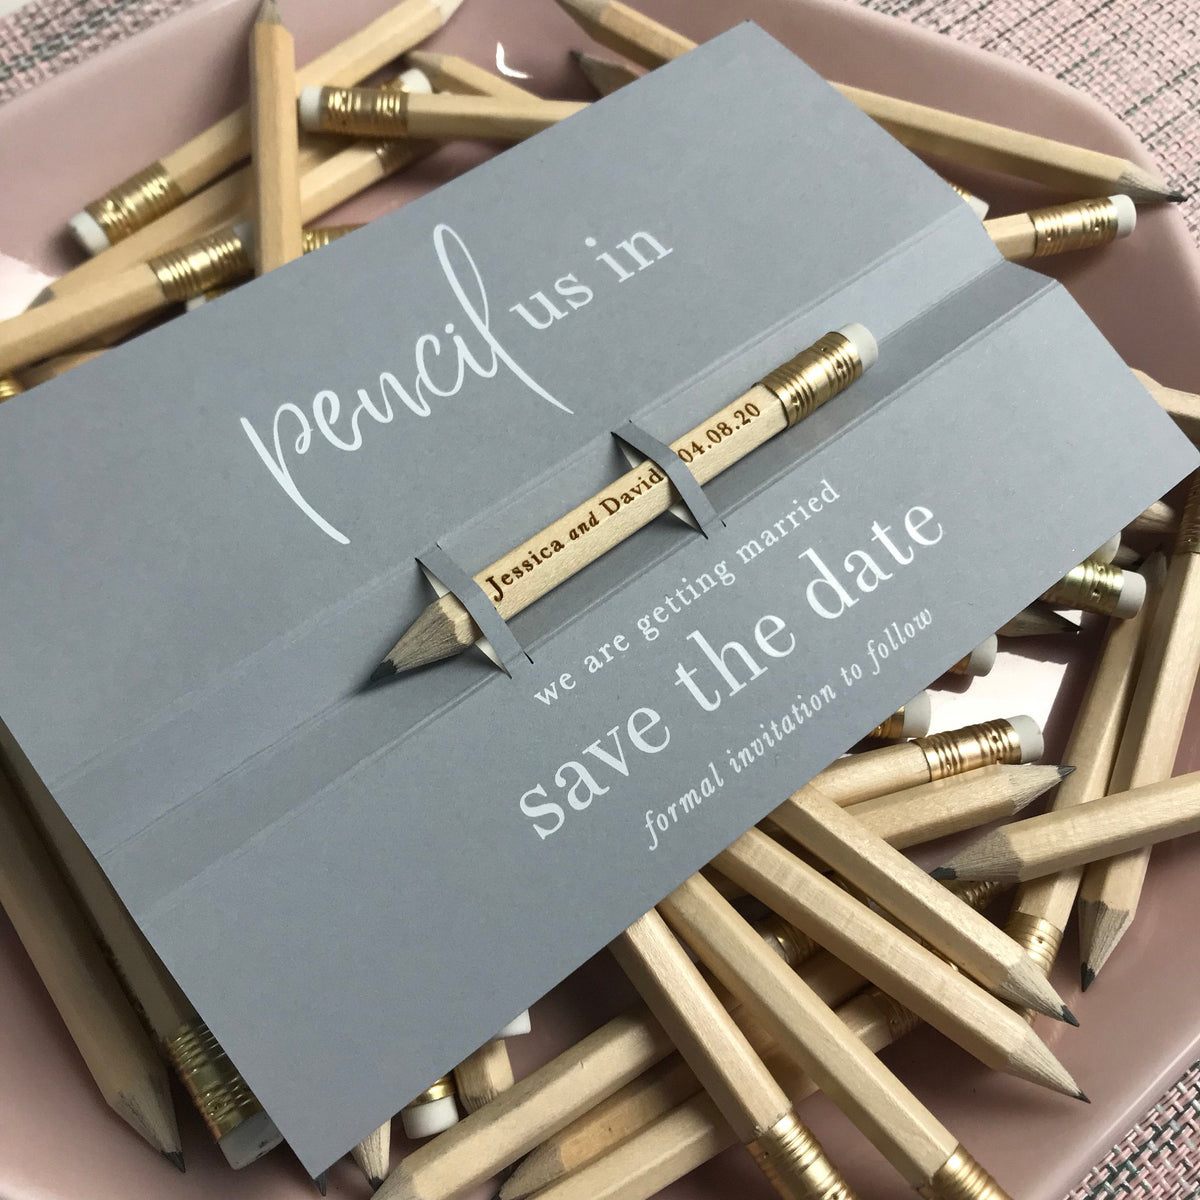 Pencil us in ✏ Save the Date Wedding Card in Dusty Pink with your names Engraved